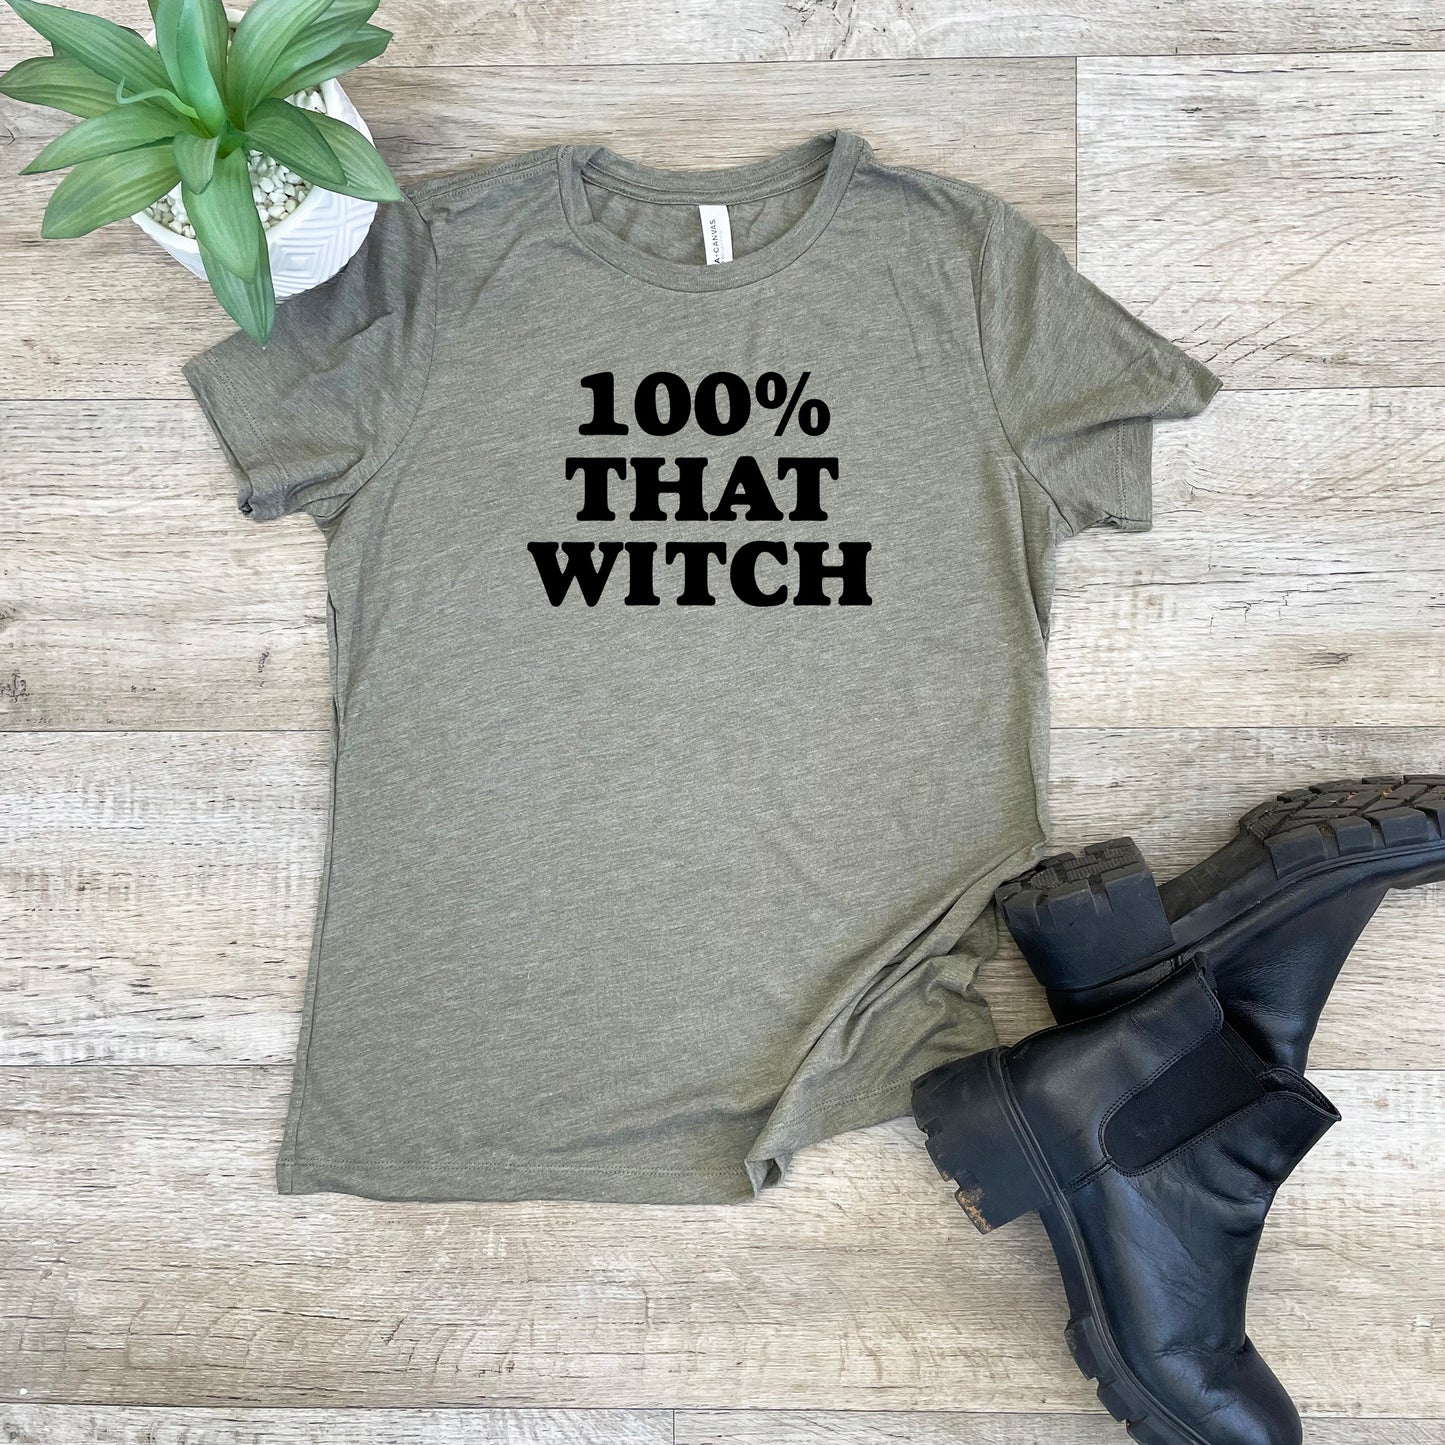 100% That Witch - Women's Crew Tee - Olive or Dusty Blue